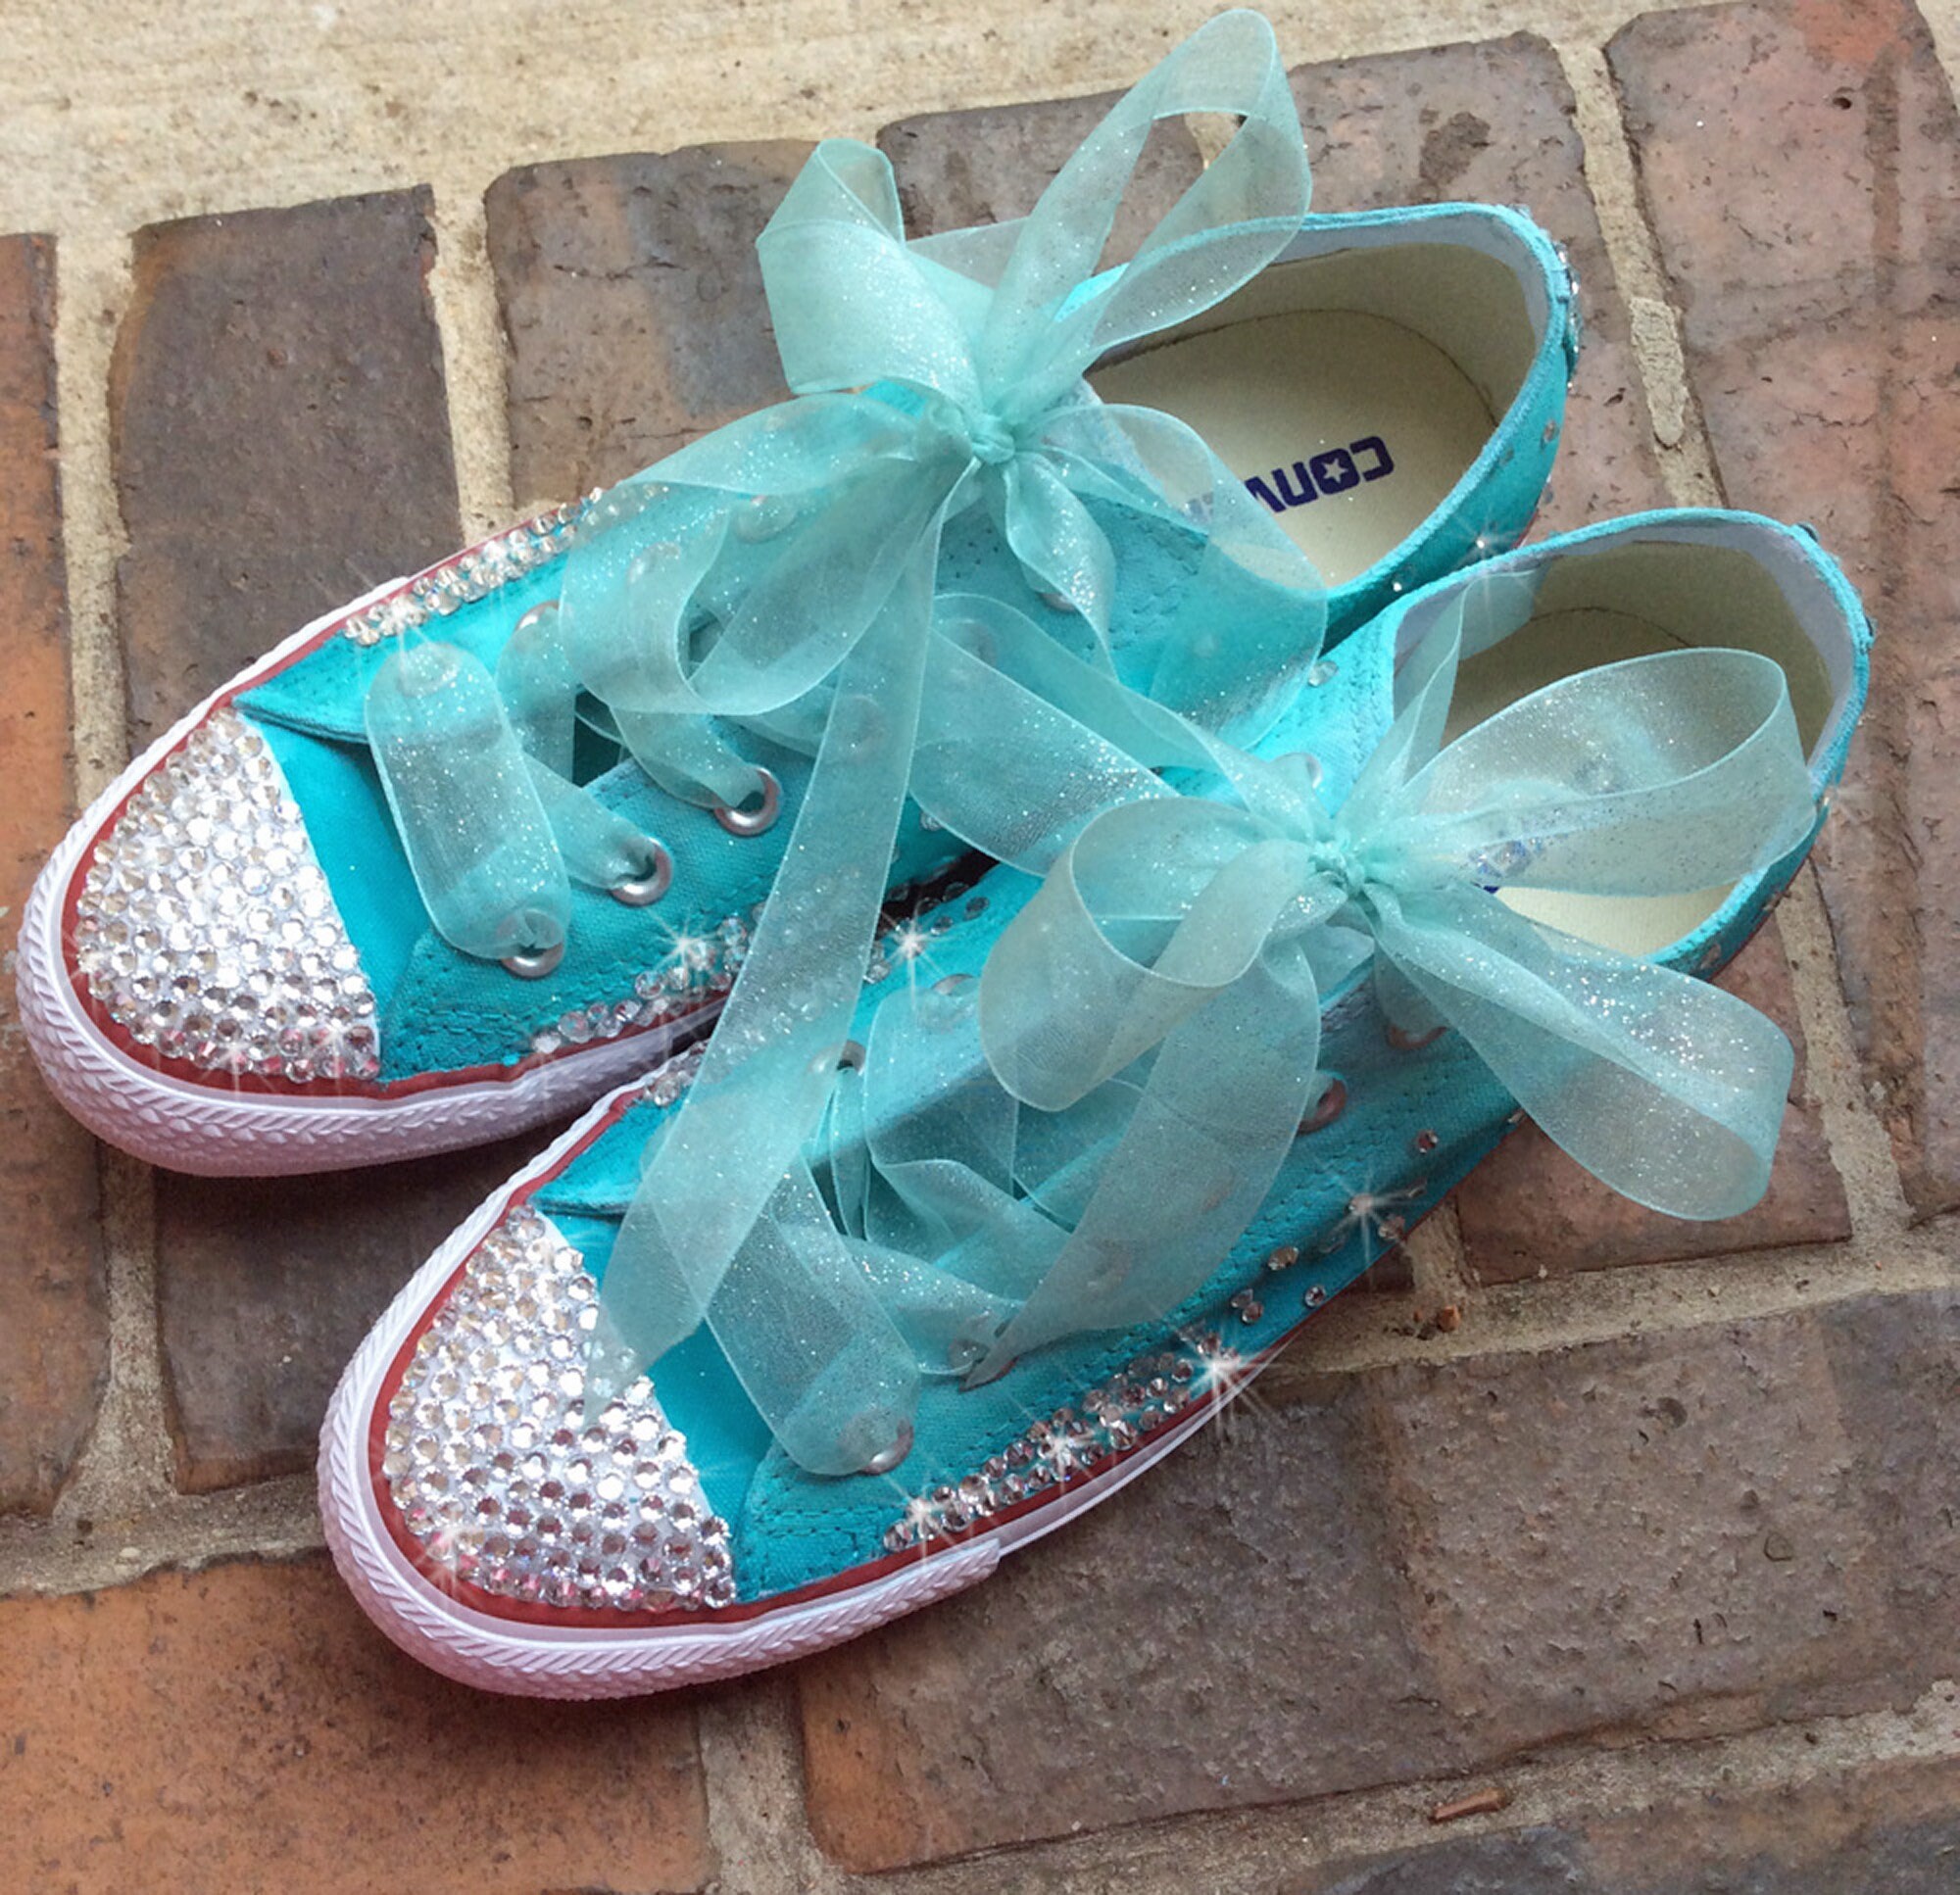 Wedding Custom Converse Low Top Shoes Turquoise Ombré painted | Etsy